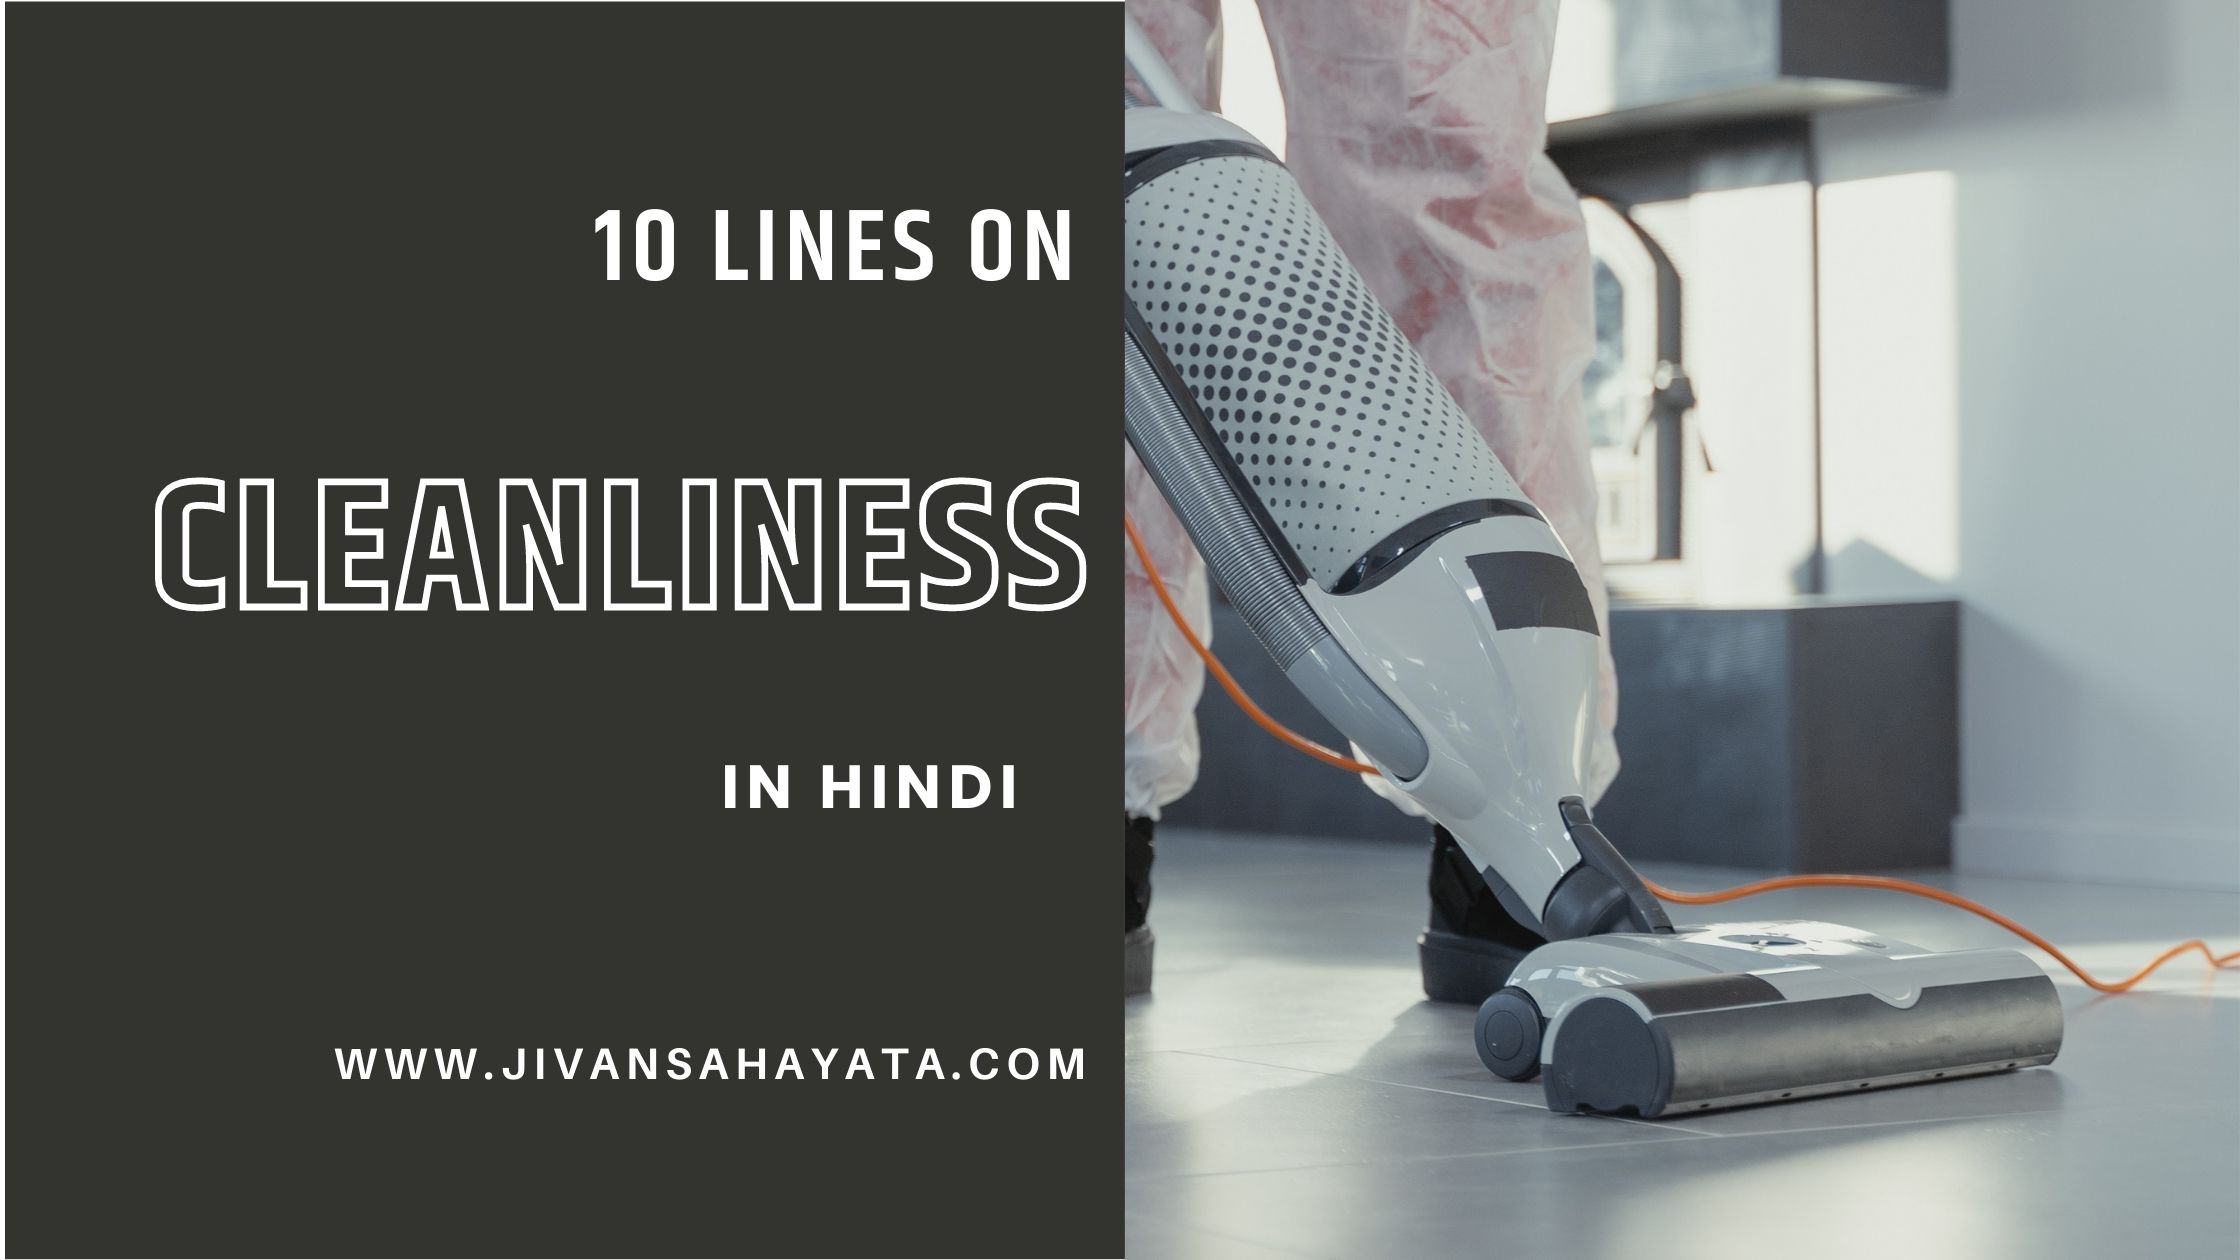 10 Lines on Cleanliness in Hindi- स्वच्छता पर 10 लाइन